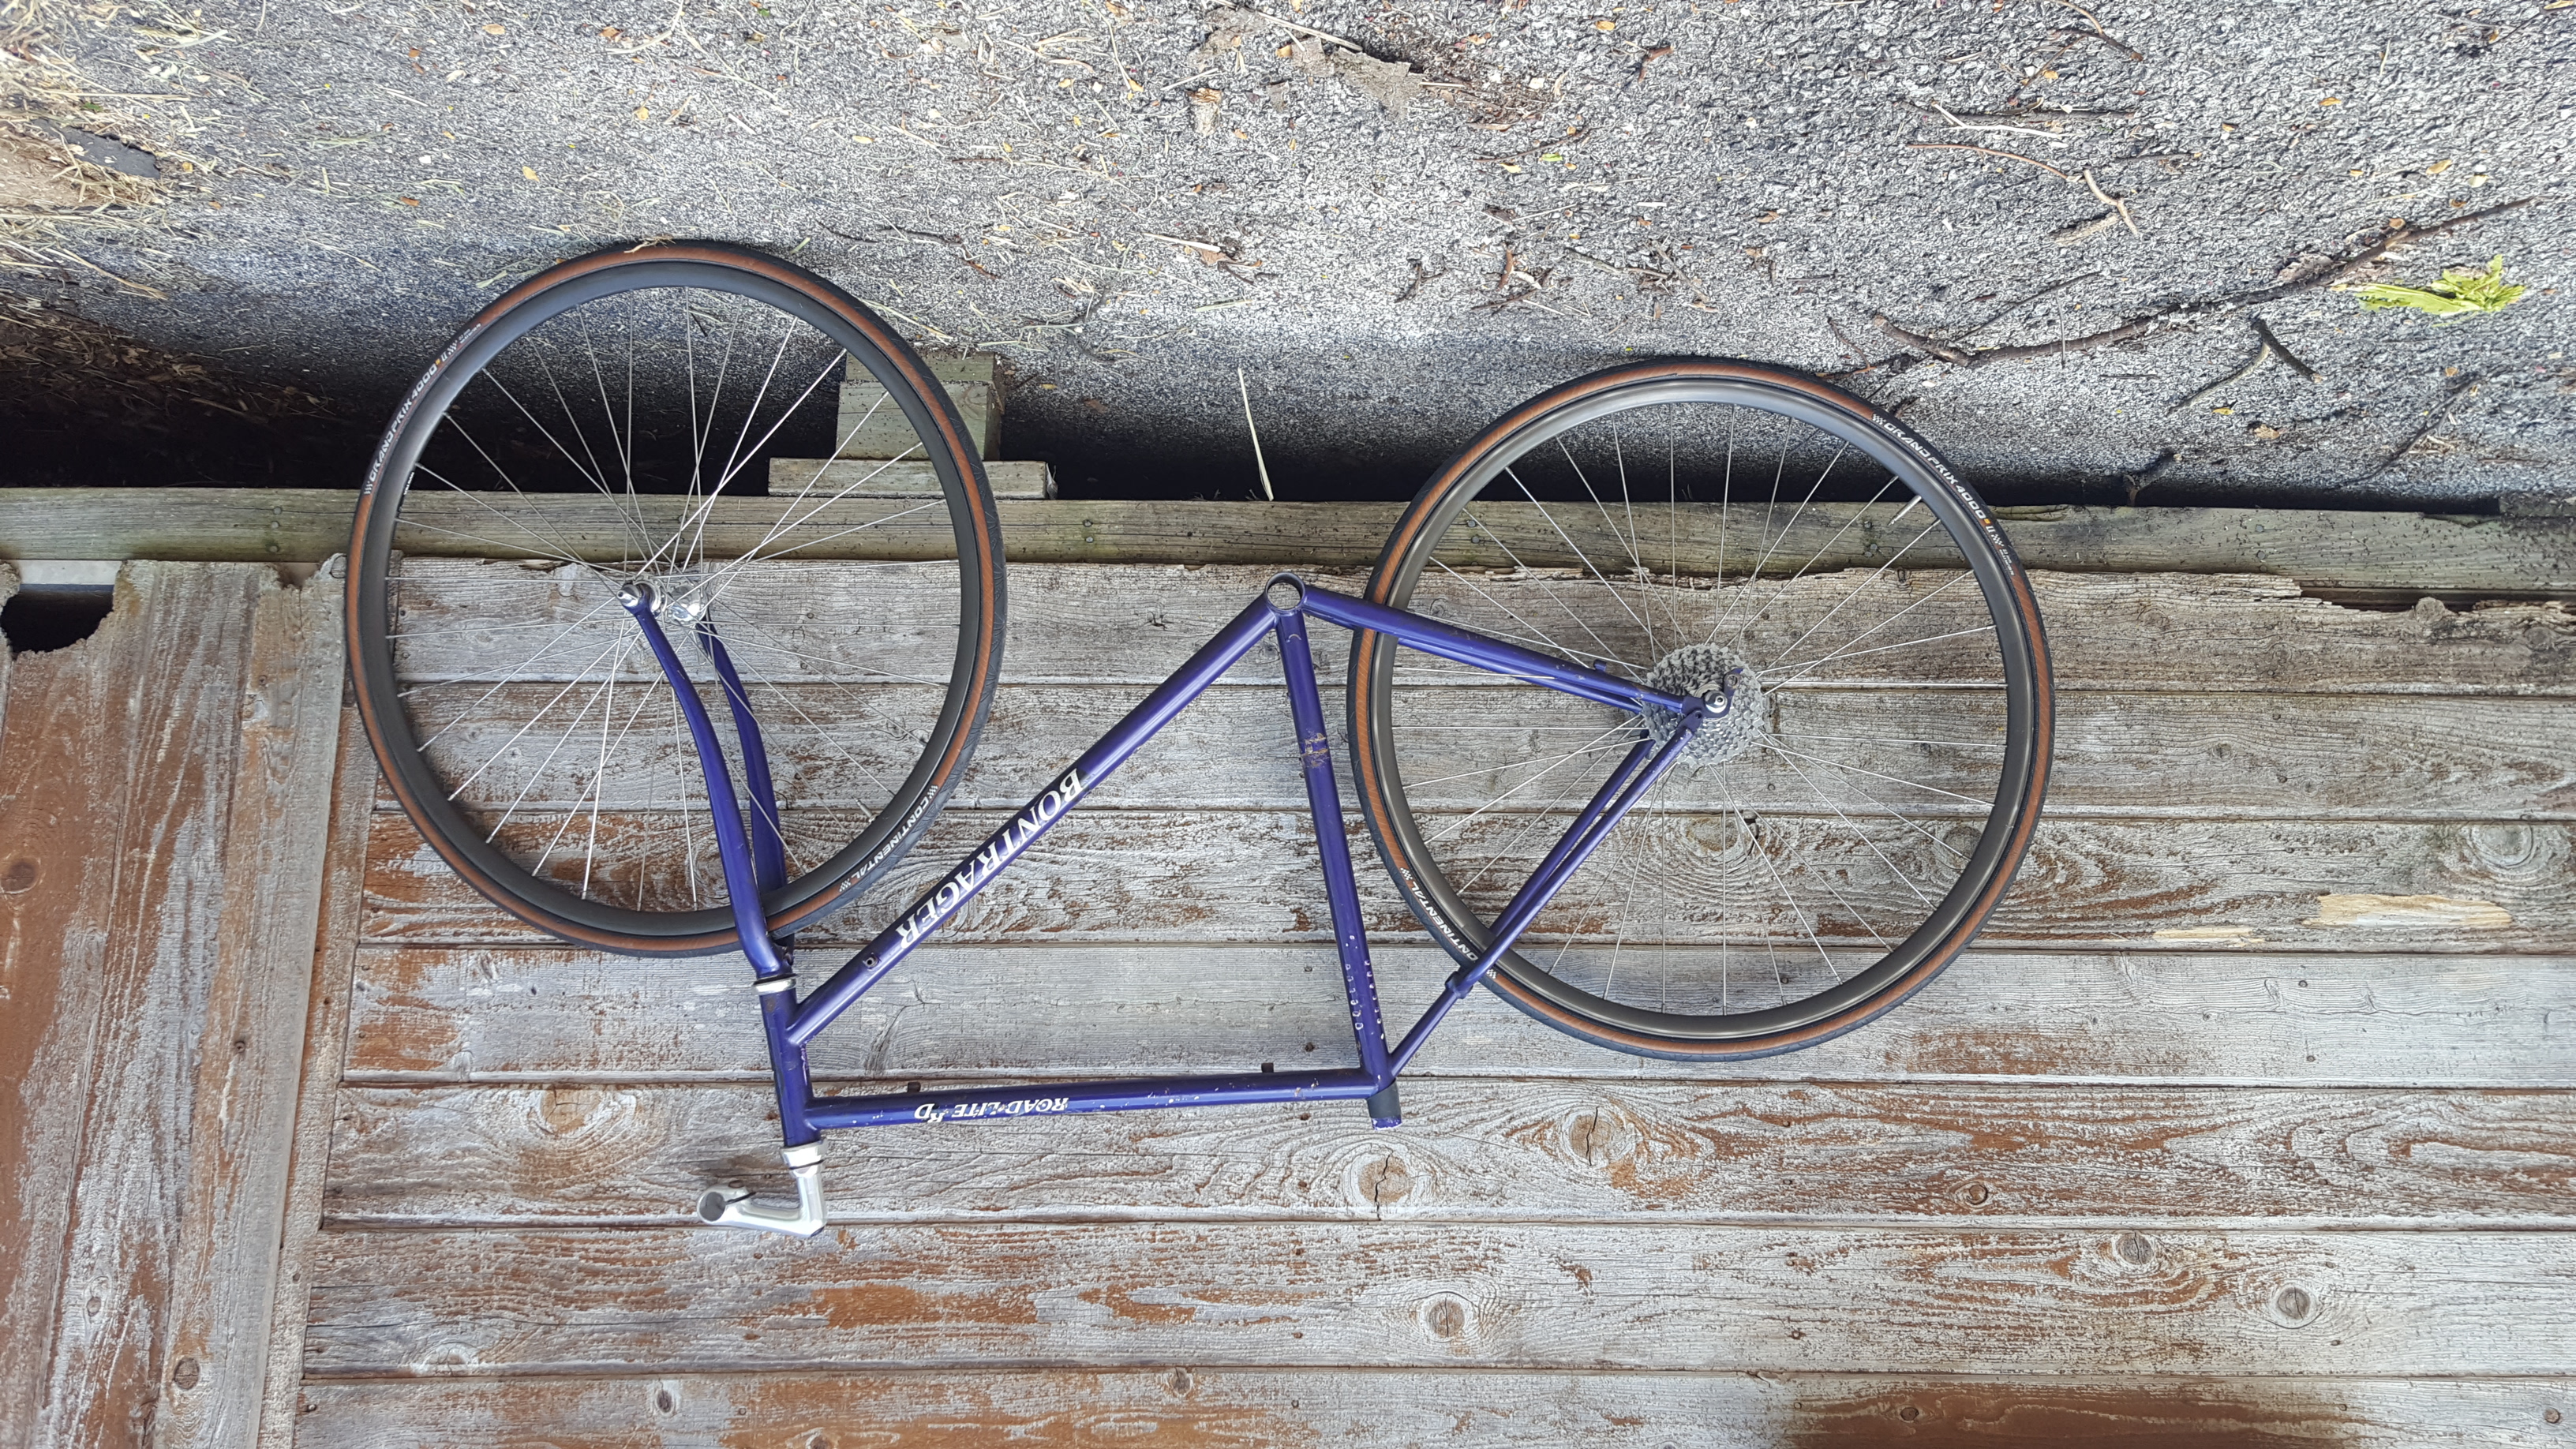 A scuffed and somewhat rusty deep-purple bicycle frame, with wheels and a stem, but otherwise no componentry posed in front of a shed.